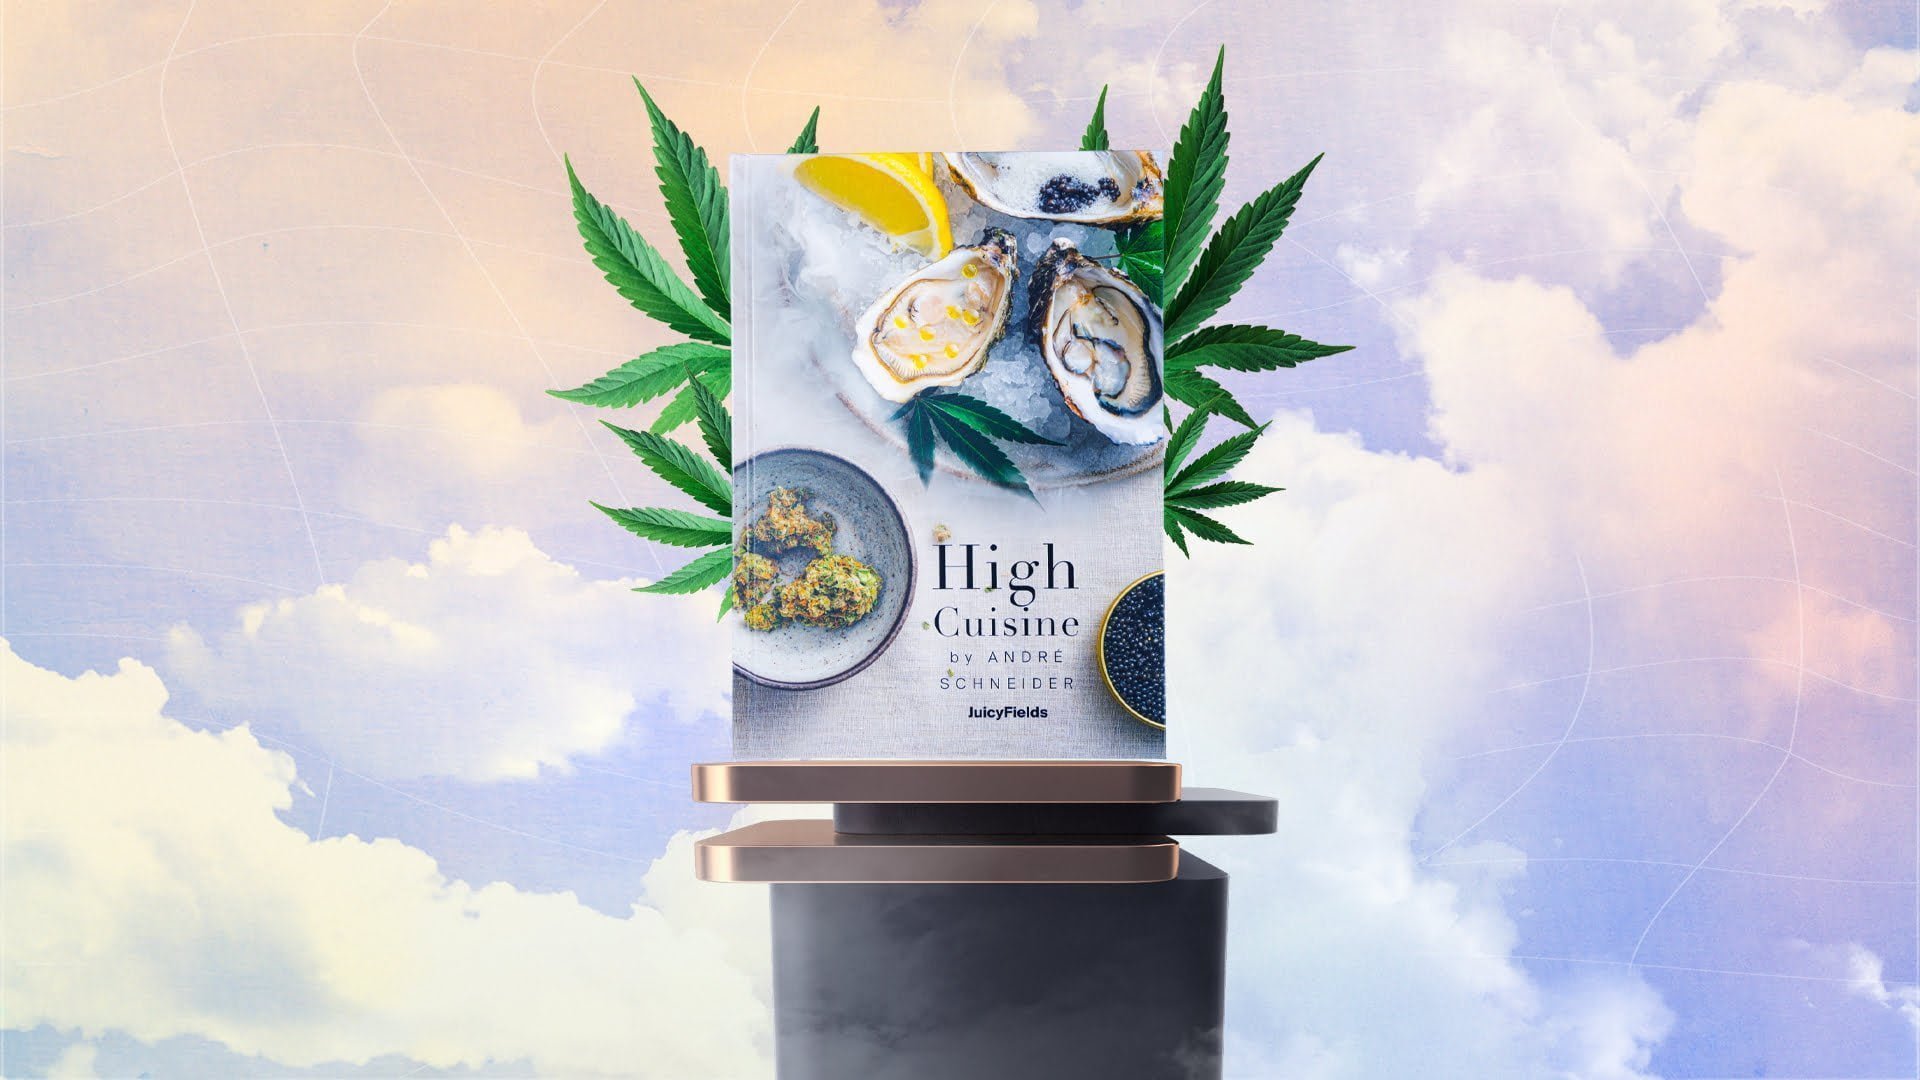 JuicyFields launches cannabis gastronomy cookbook